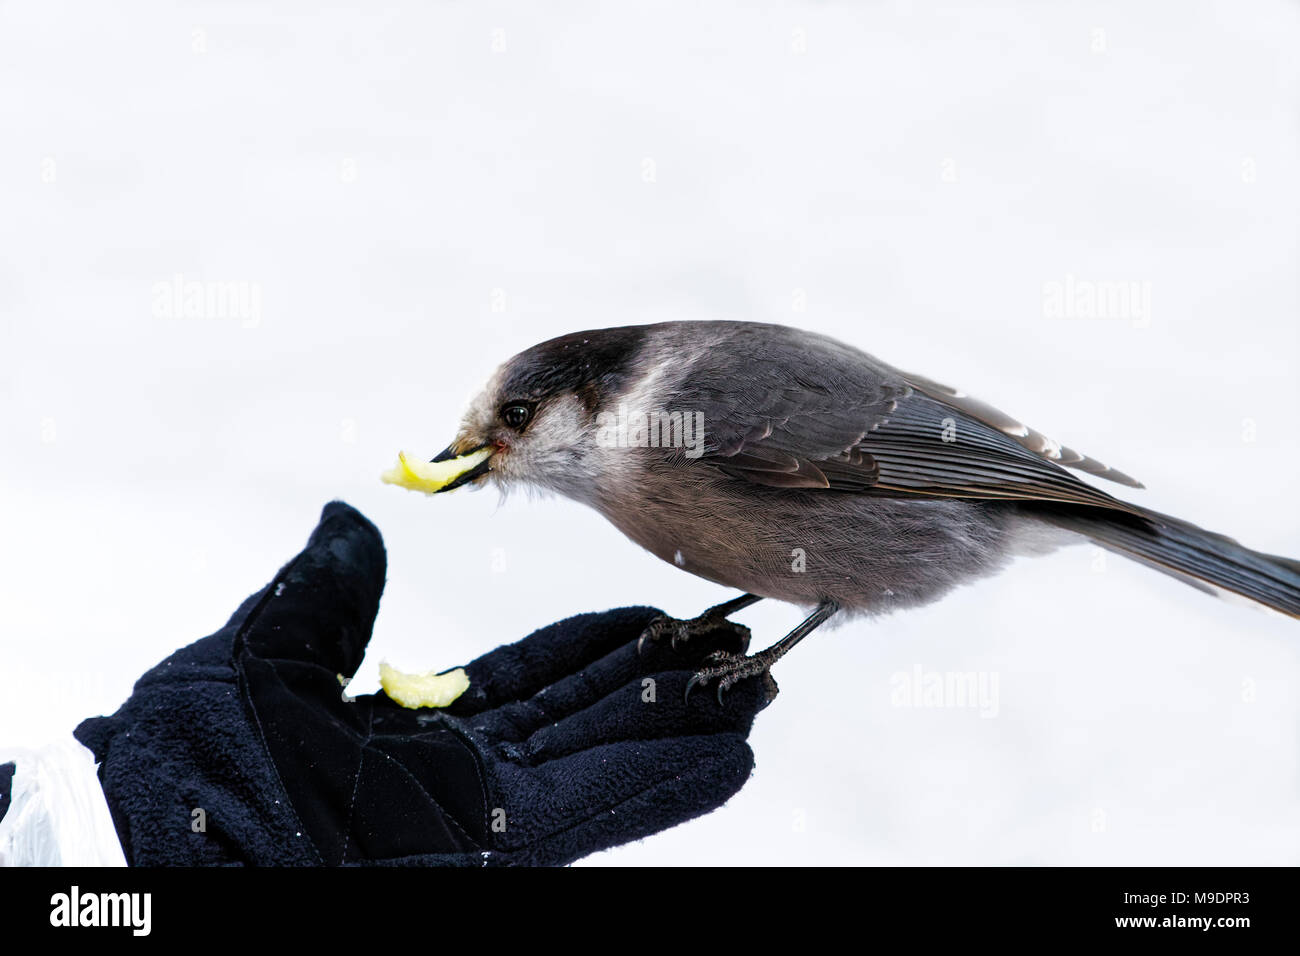 43,118.09138 close-up of Gray Jay, Canada jay eating out of a woman’s gloved hand while she feeds the bird Stock Photo